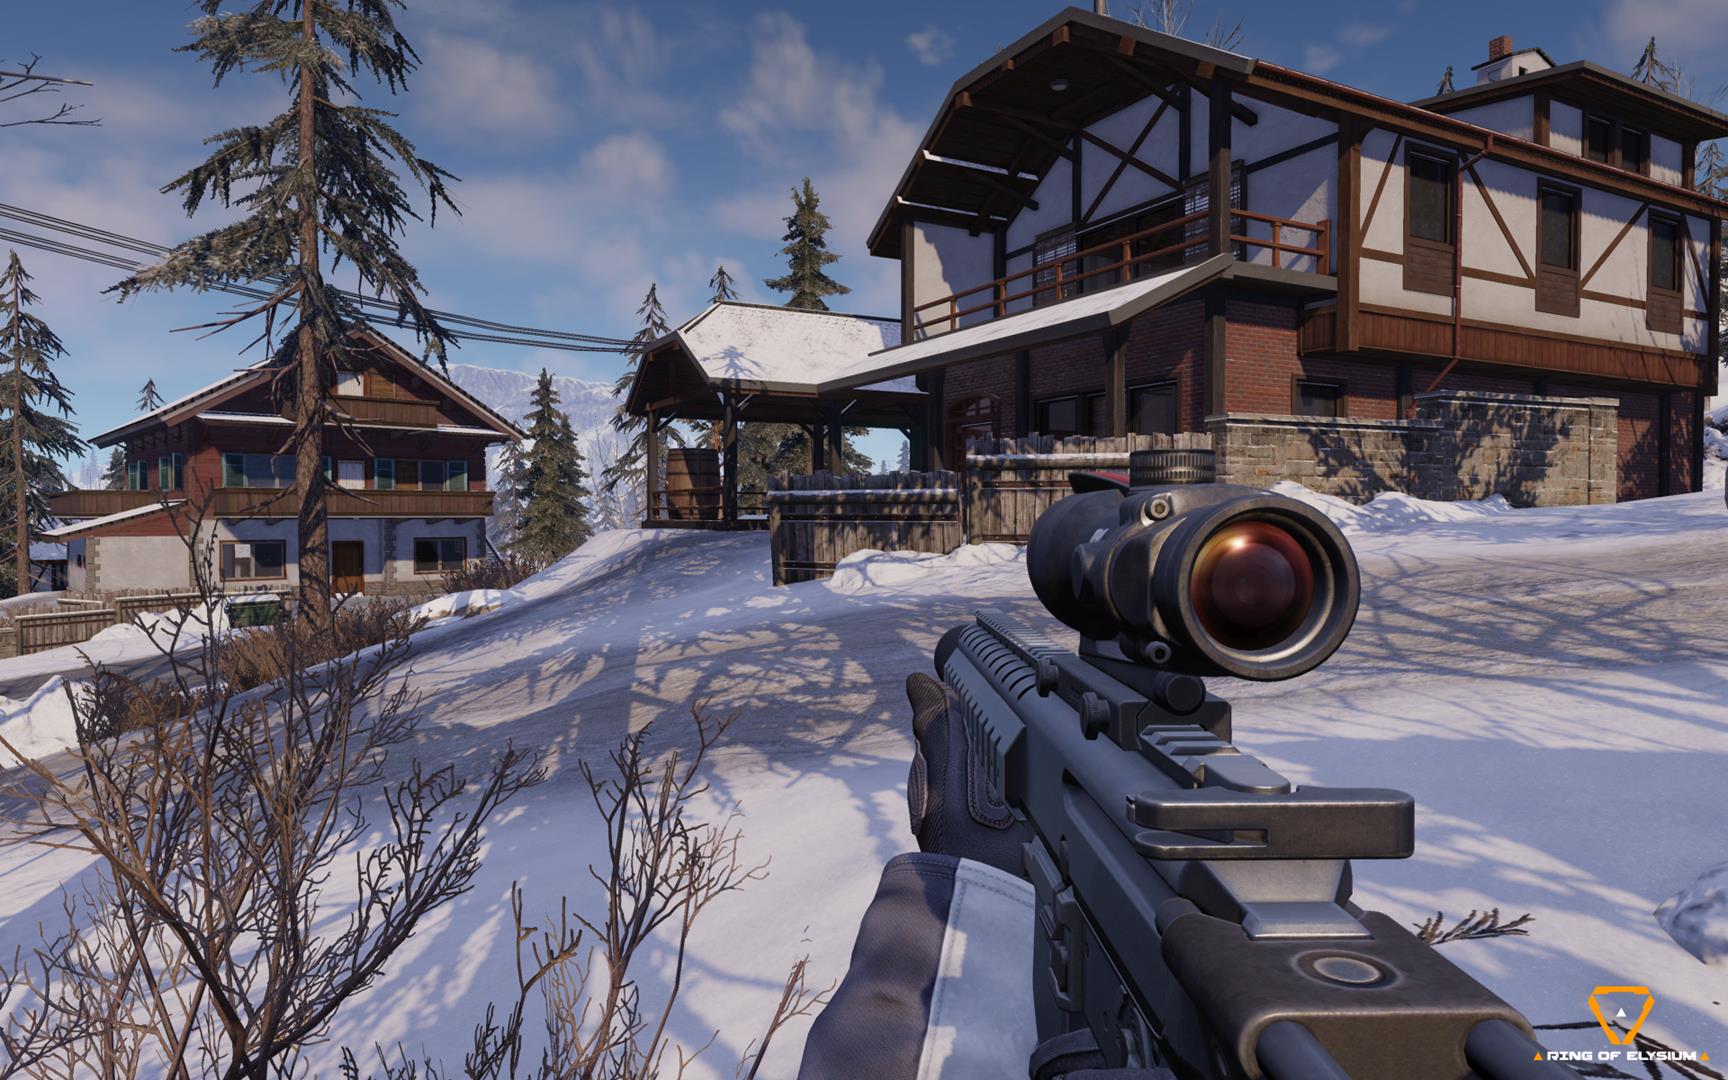 Eerder oneerlijk Adelaide Ring of Elysium, the battle royale shooter where you can snowboard and  paraglide, is coming to Steam next week | VG247